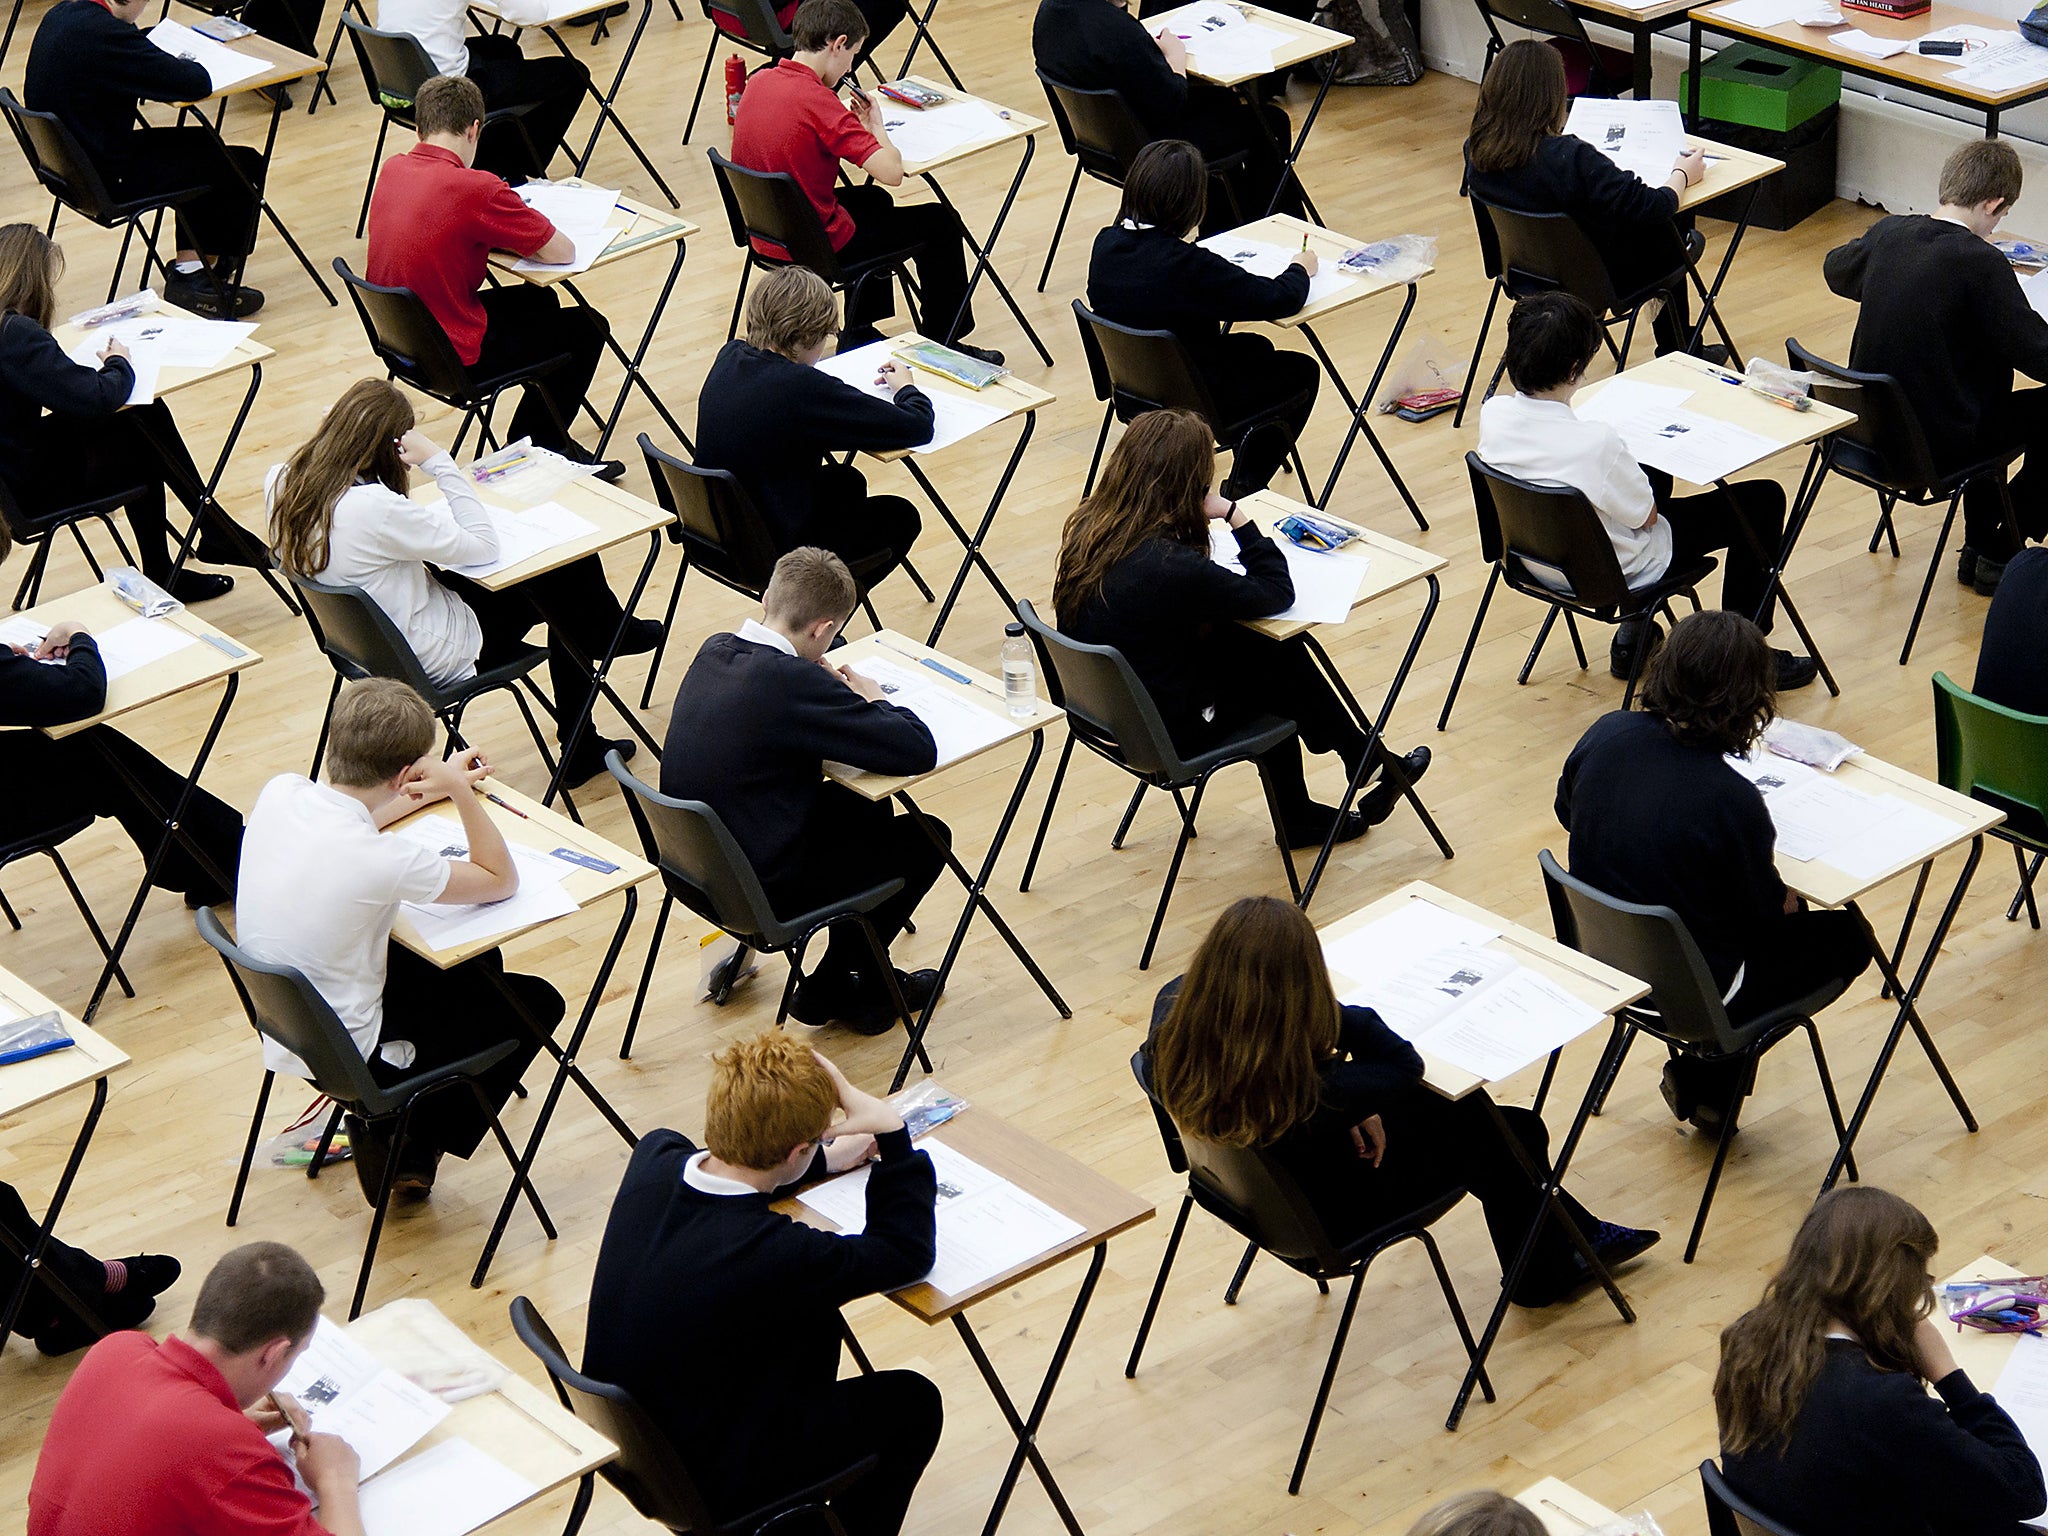 GCSEs remain the mainstay of secondary education